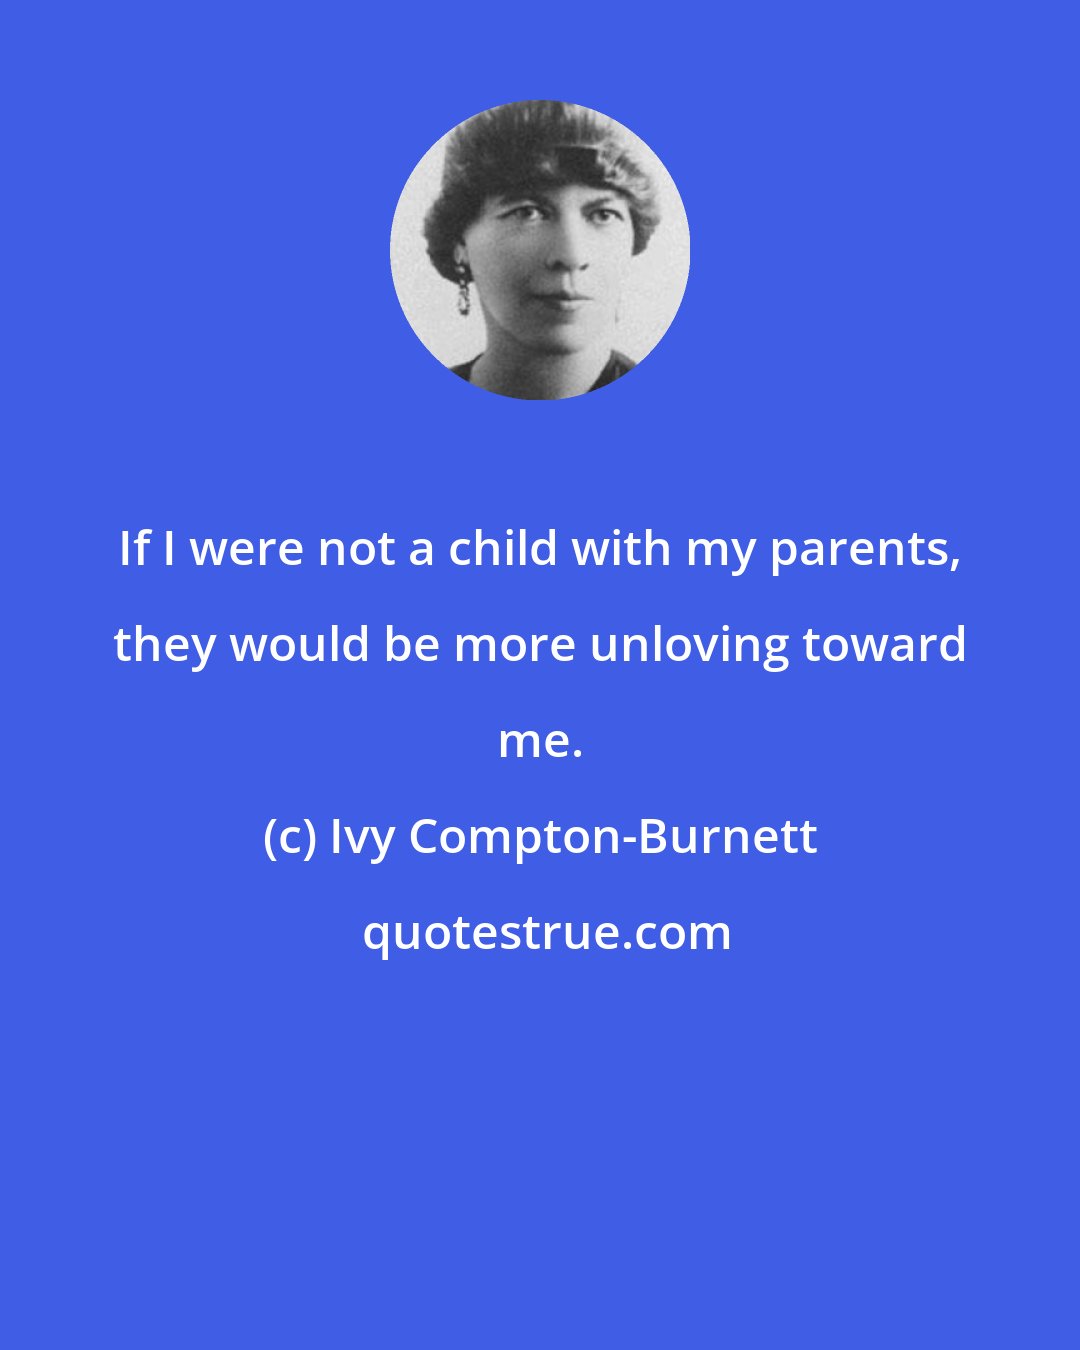 Ivy Compton-Burnett: If I were not a child with my parents, they would be more unloving toward me.